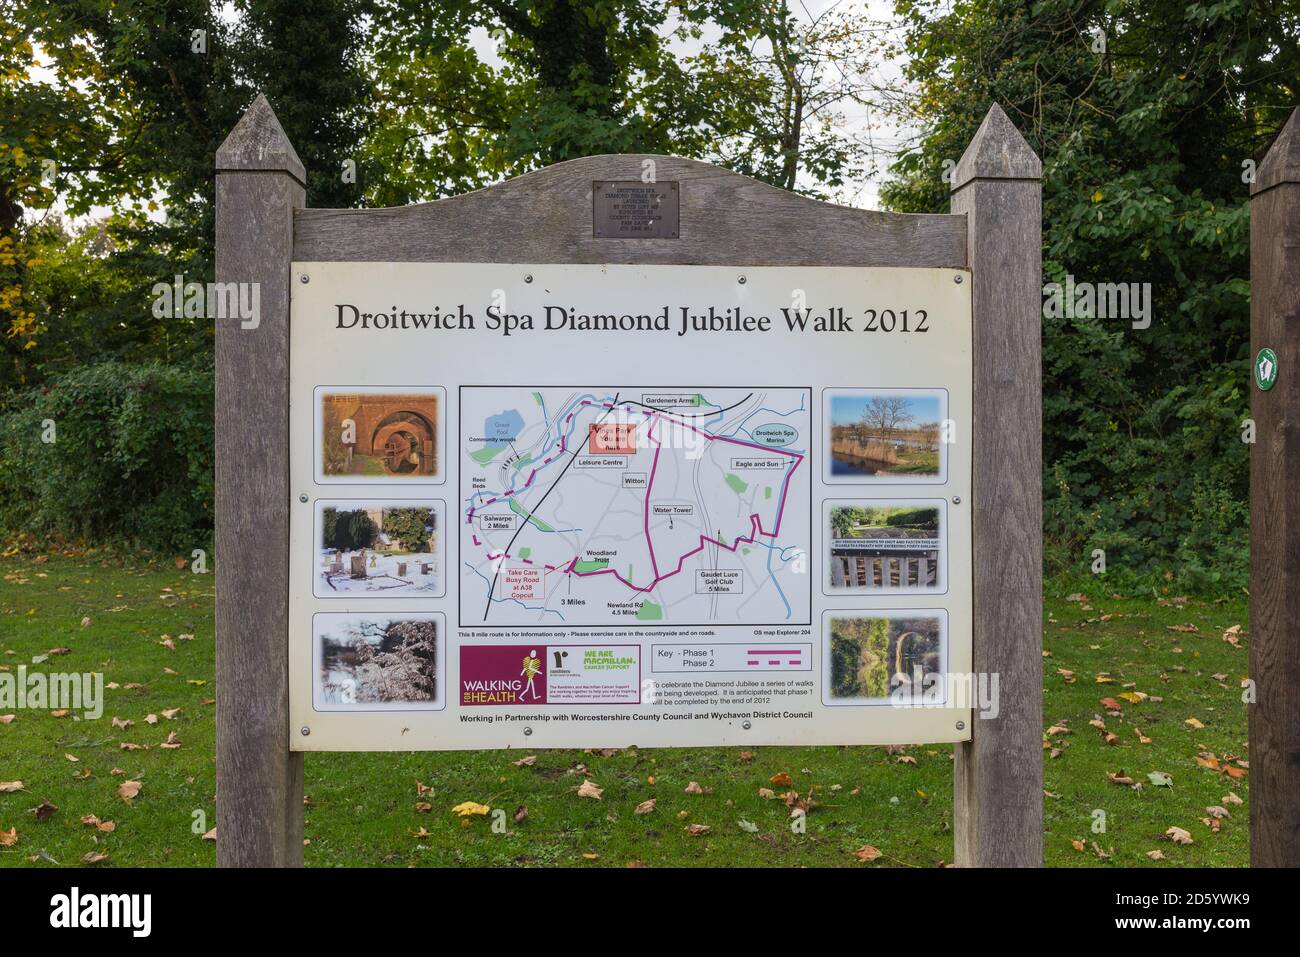 Map and information board for the Droitwich Spa Diamond Jubilee Walk 2012 footpath in Vines Park, Droitwich Spa, Worcestershire, UK Stock Photo